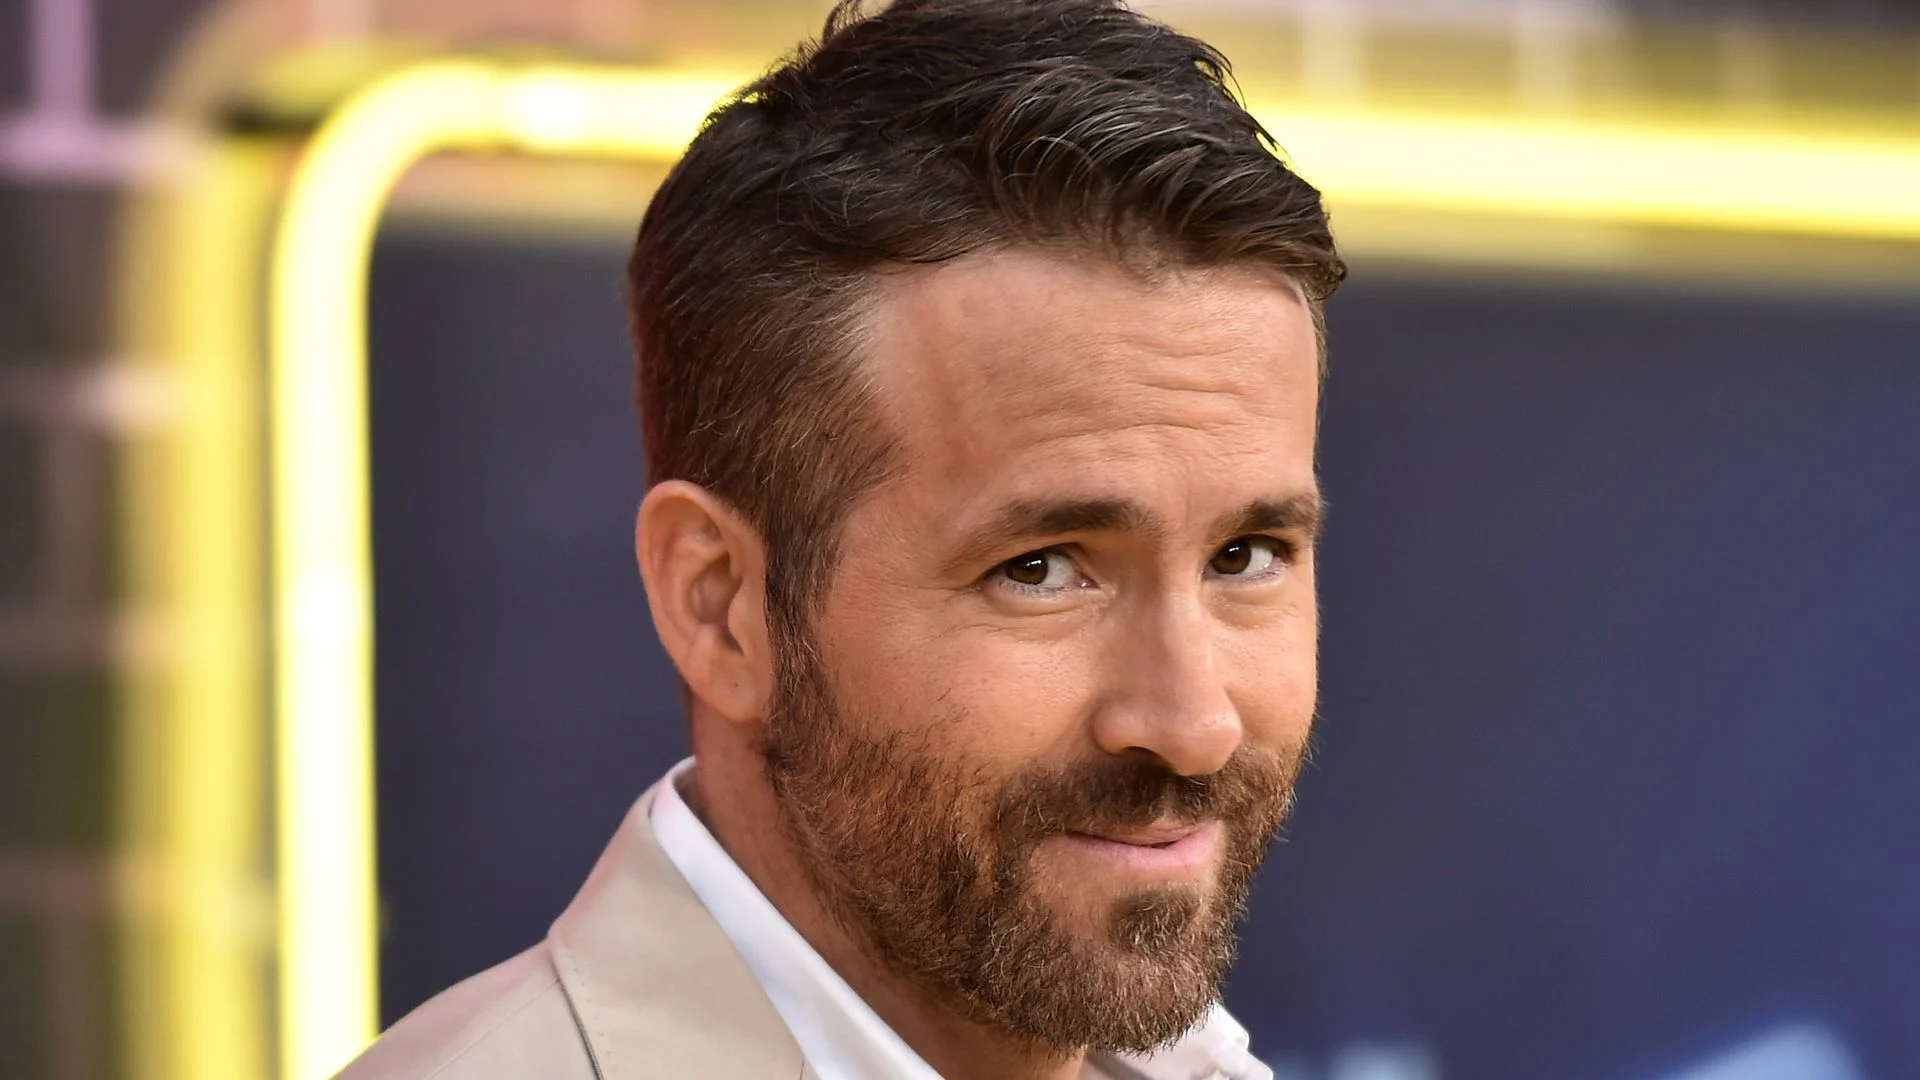 Why Did Ryan Reynolds' New Movie 'IF' Get Such Low Reviews? Fans and Critics Clash Over Surprising Scores